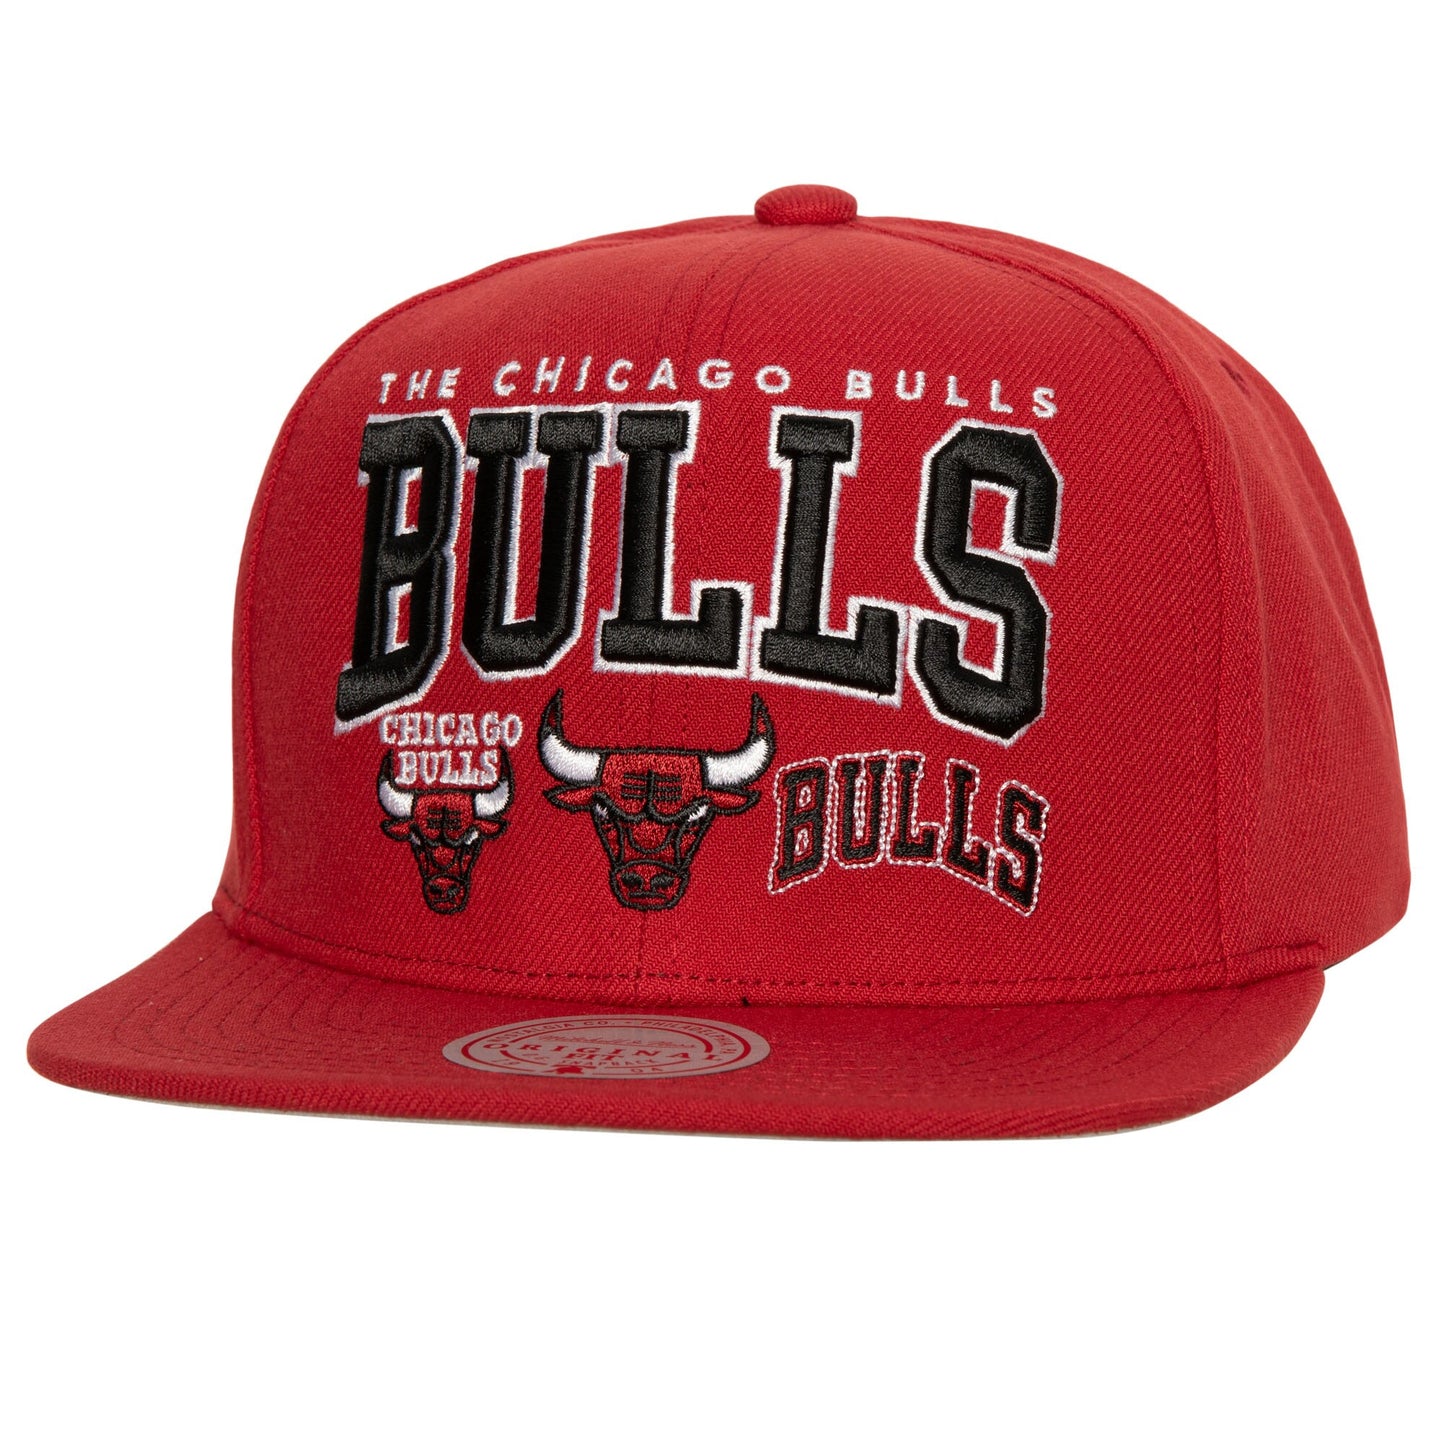 Chicago Bulls Mitchell & Ness Champ Stack Snapback Hat - Red